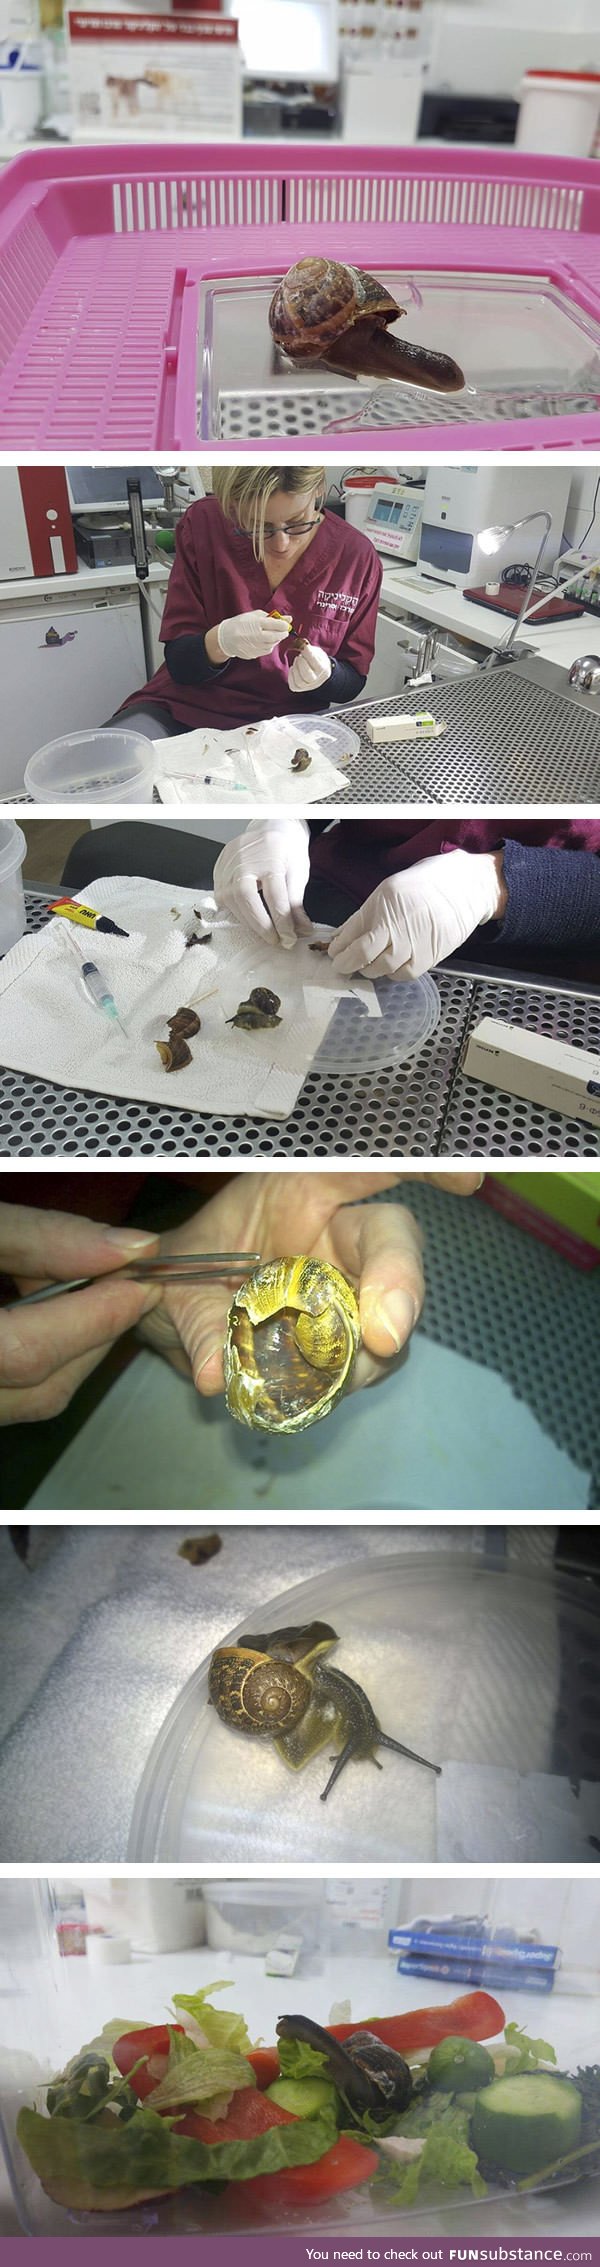 Woman steps on snail, brings him to vet to fix his shell